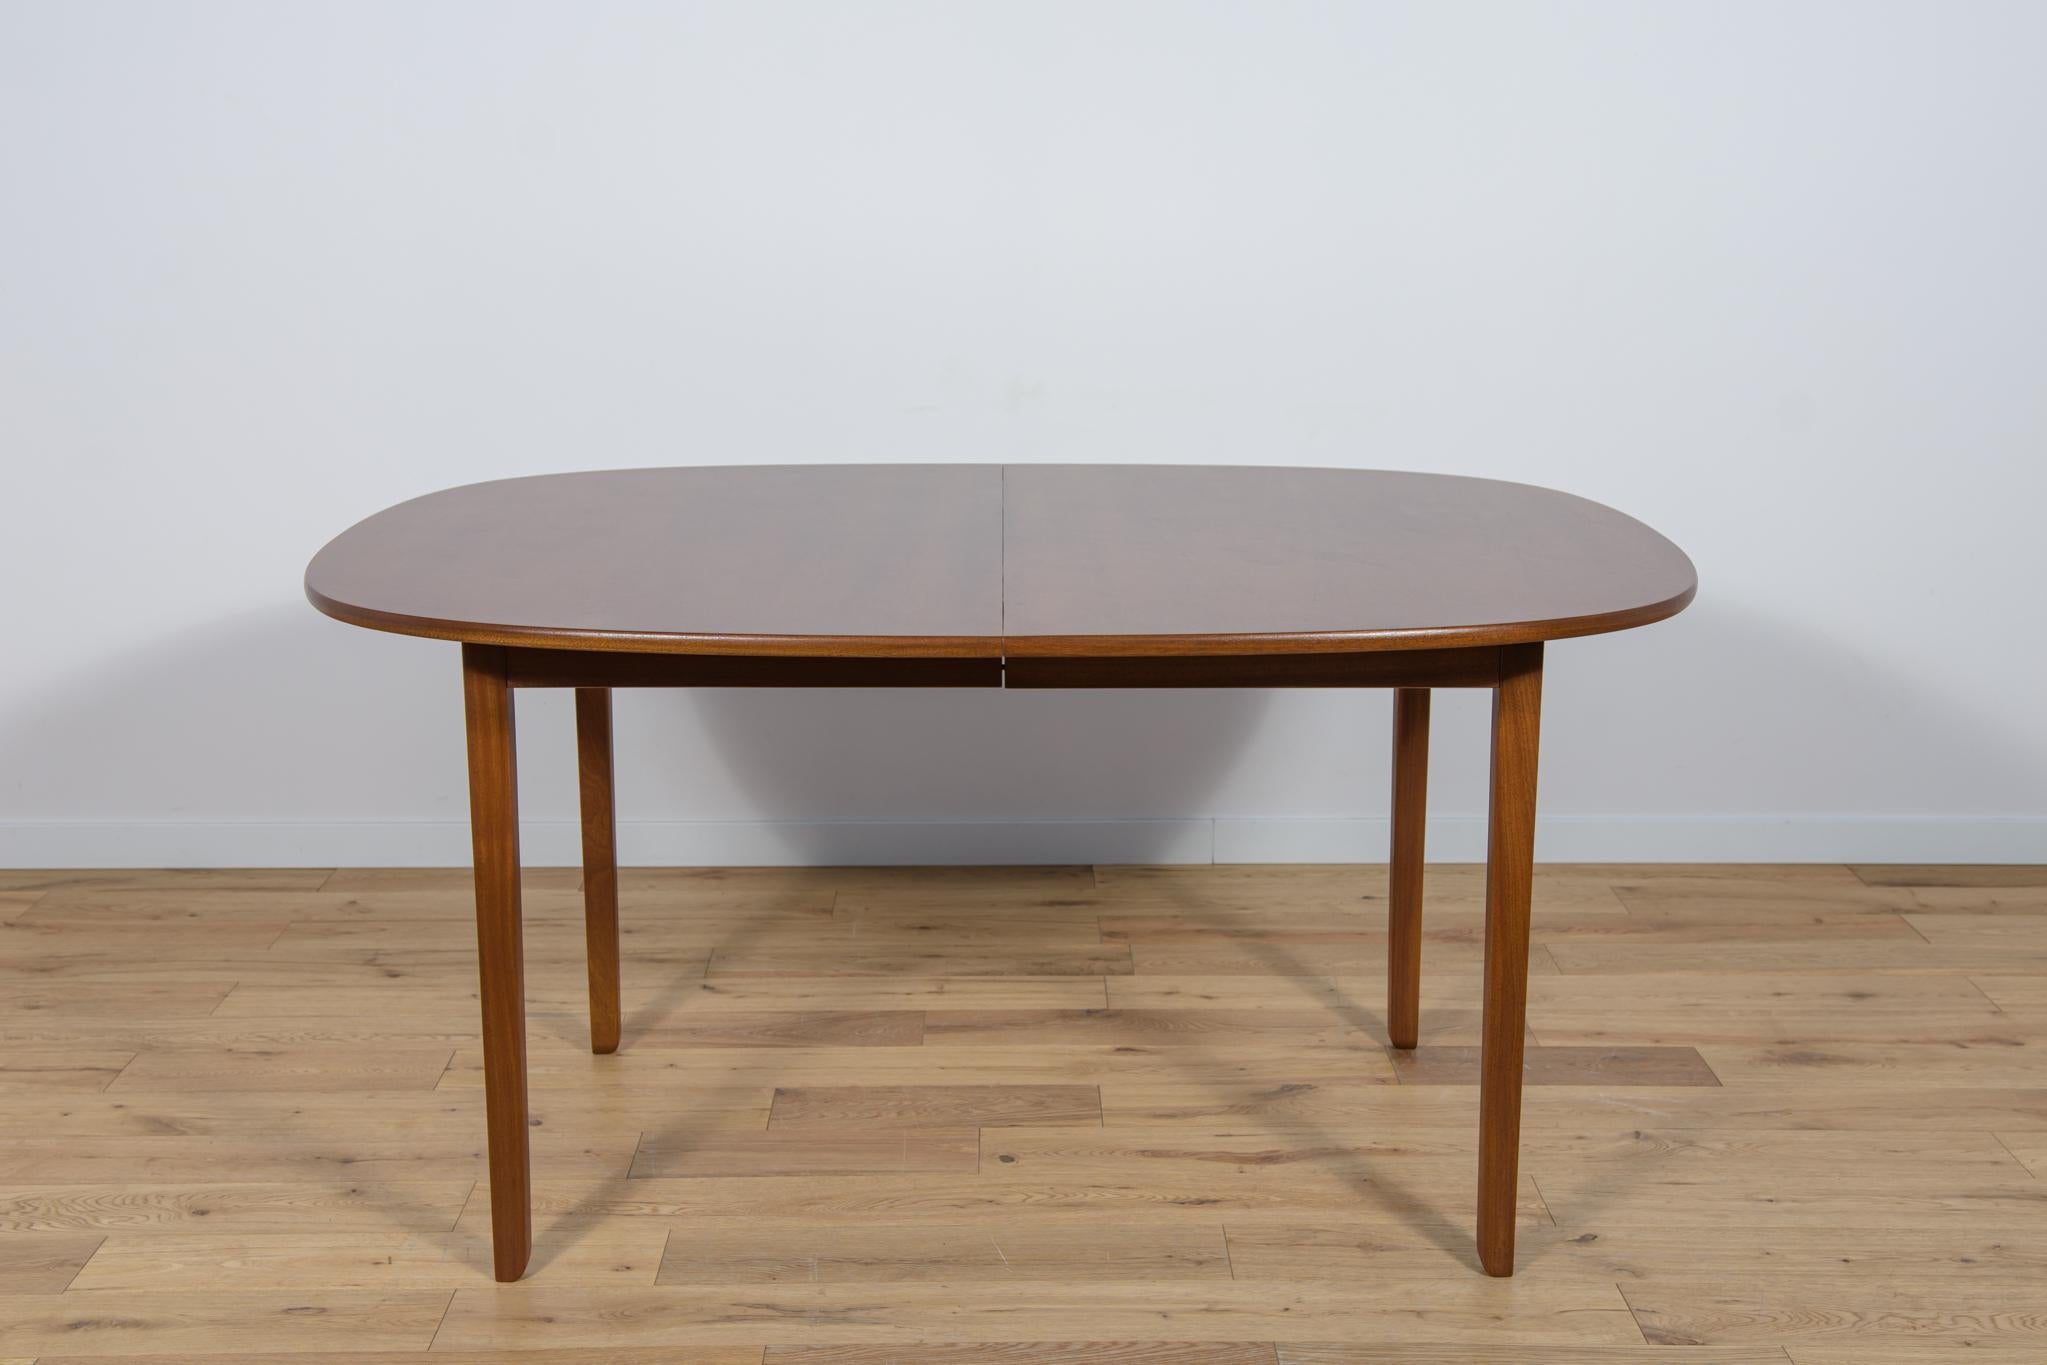 The Table Rungstedlund was designed by Ole Wanscher and manufactured in the 1960s and 1970s by Poul Jeppesen in St. Heddinge in Denmark. Completely restored. The table is made of mahogany wood. The wood elements have been cleaned from the old